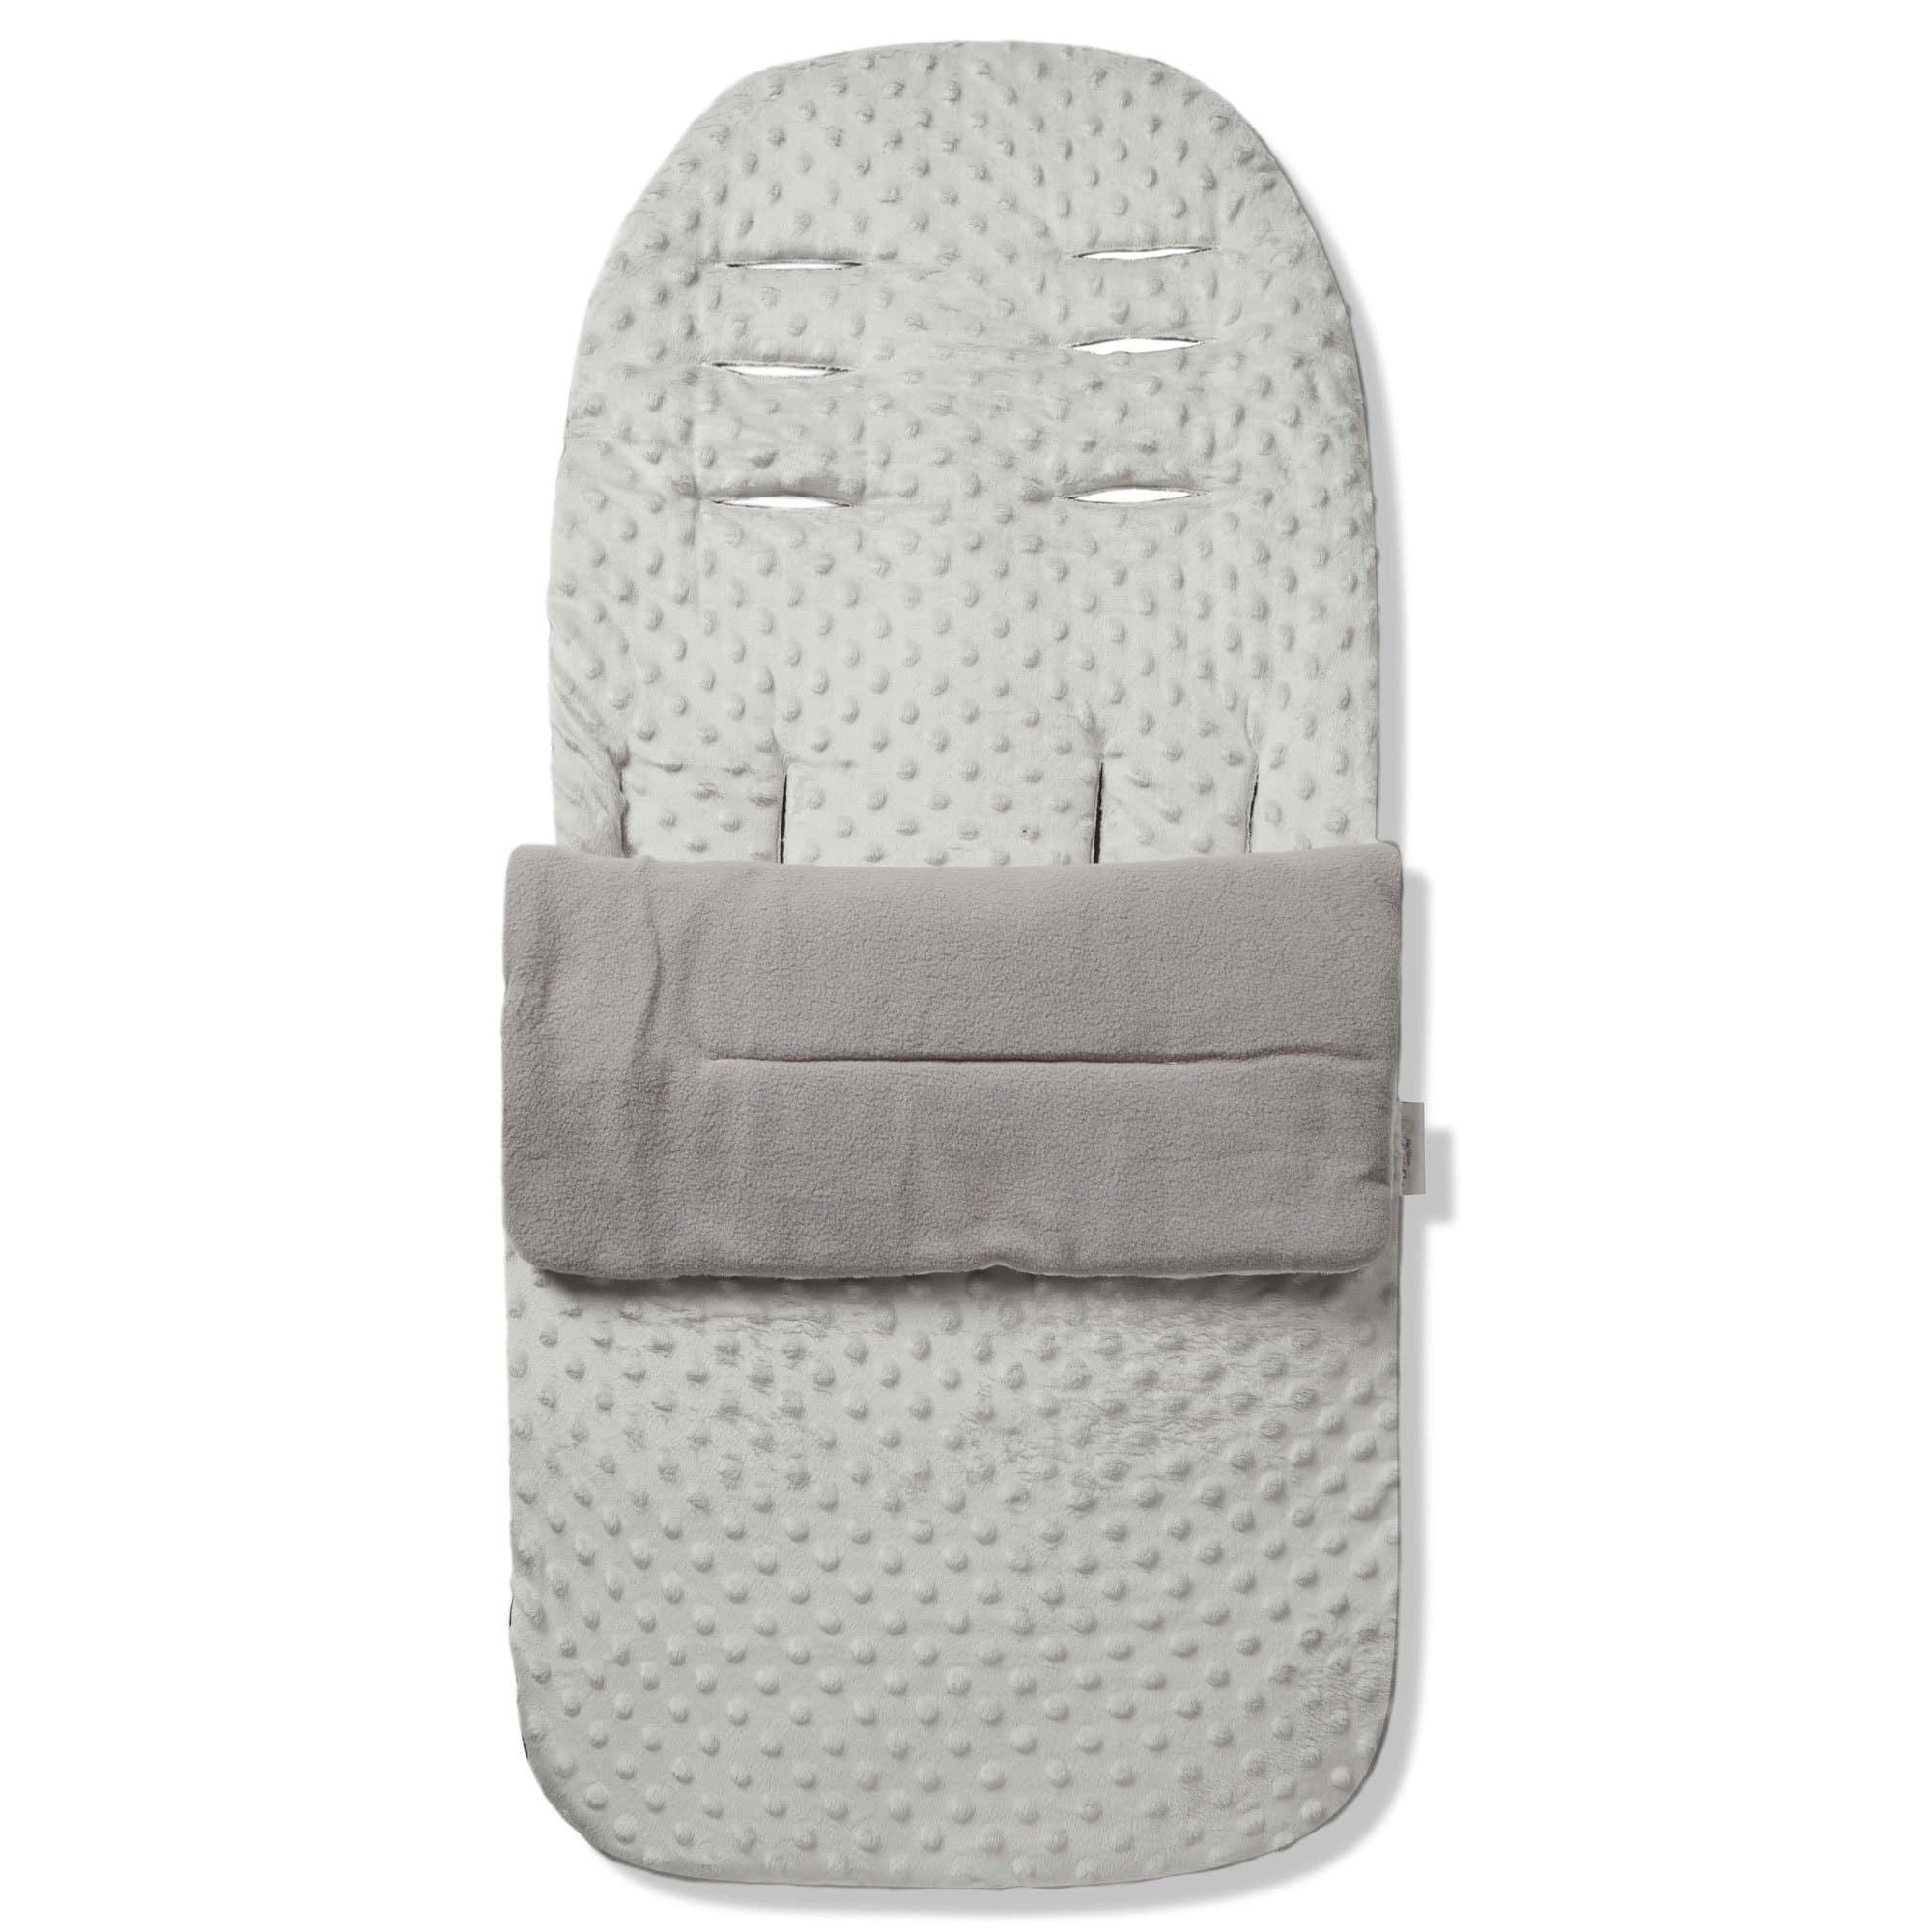 Dimple Footmuff / Cosy Toes Compatible with Babybus - Grey / Fits All Models | For Your Little One